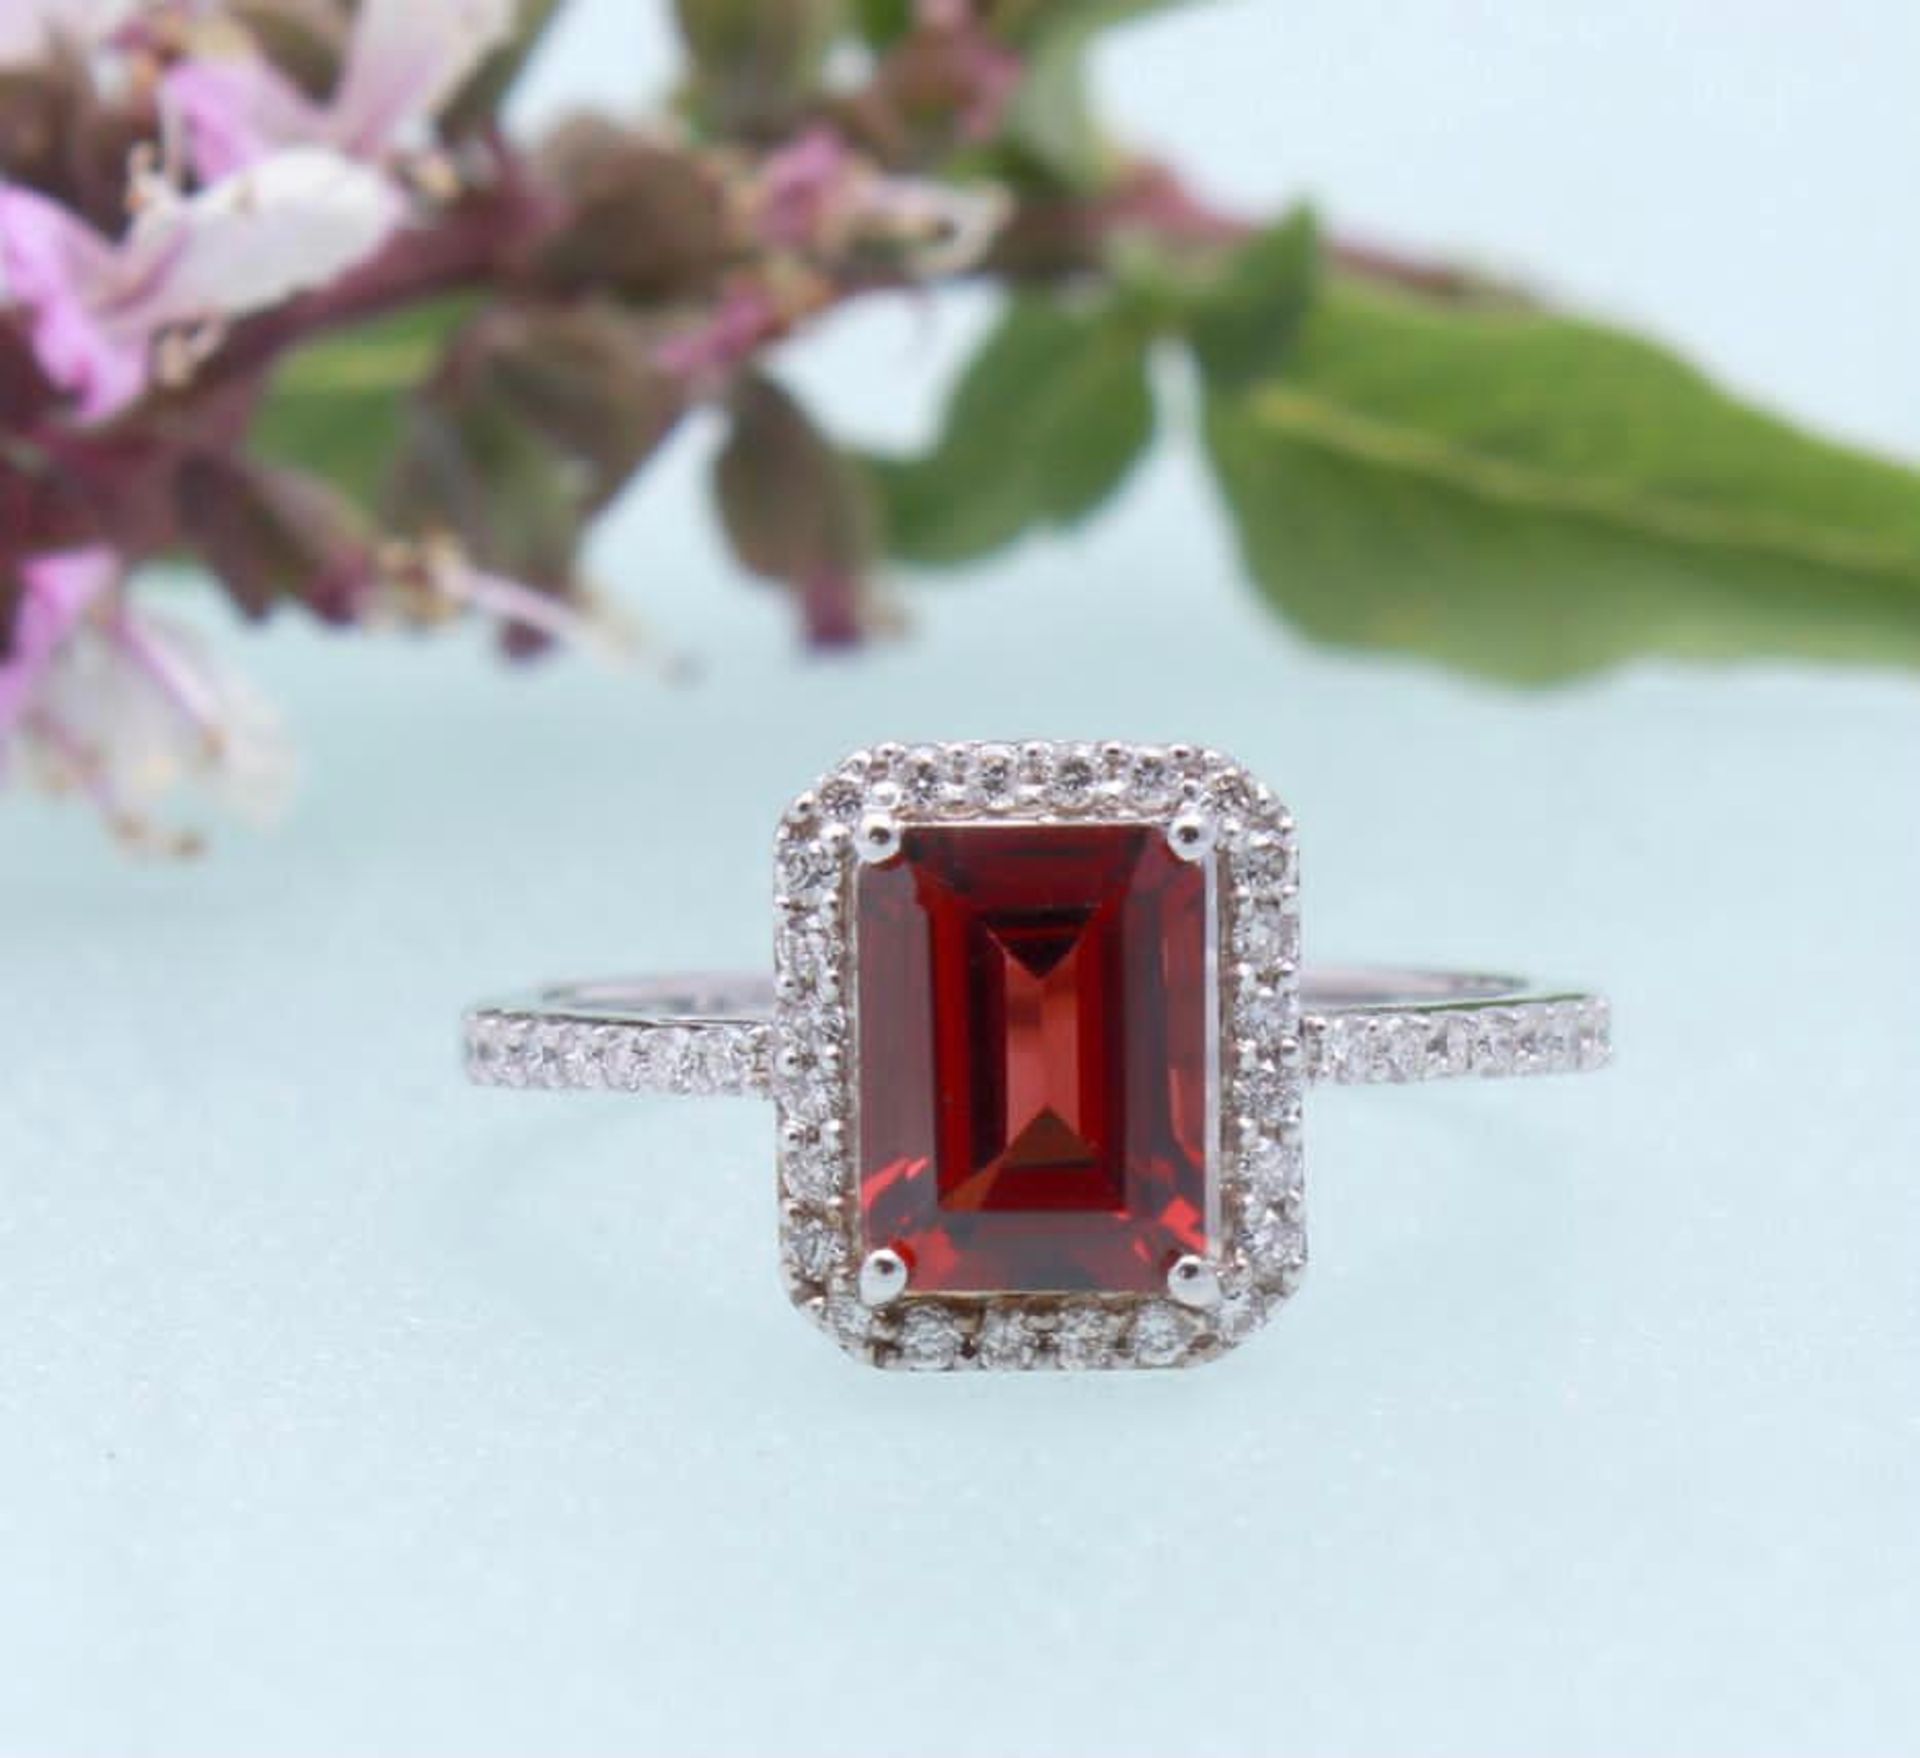 Beautiful Natural Garnet Ring With Diamonds And 18k Gold - Image 3 of 3